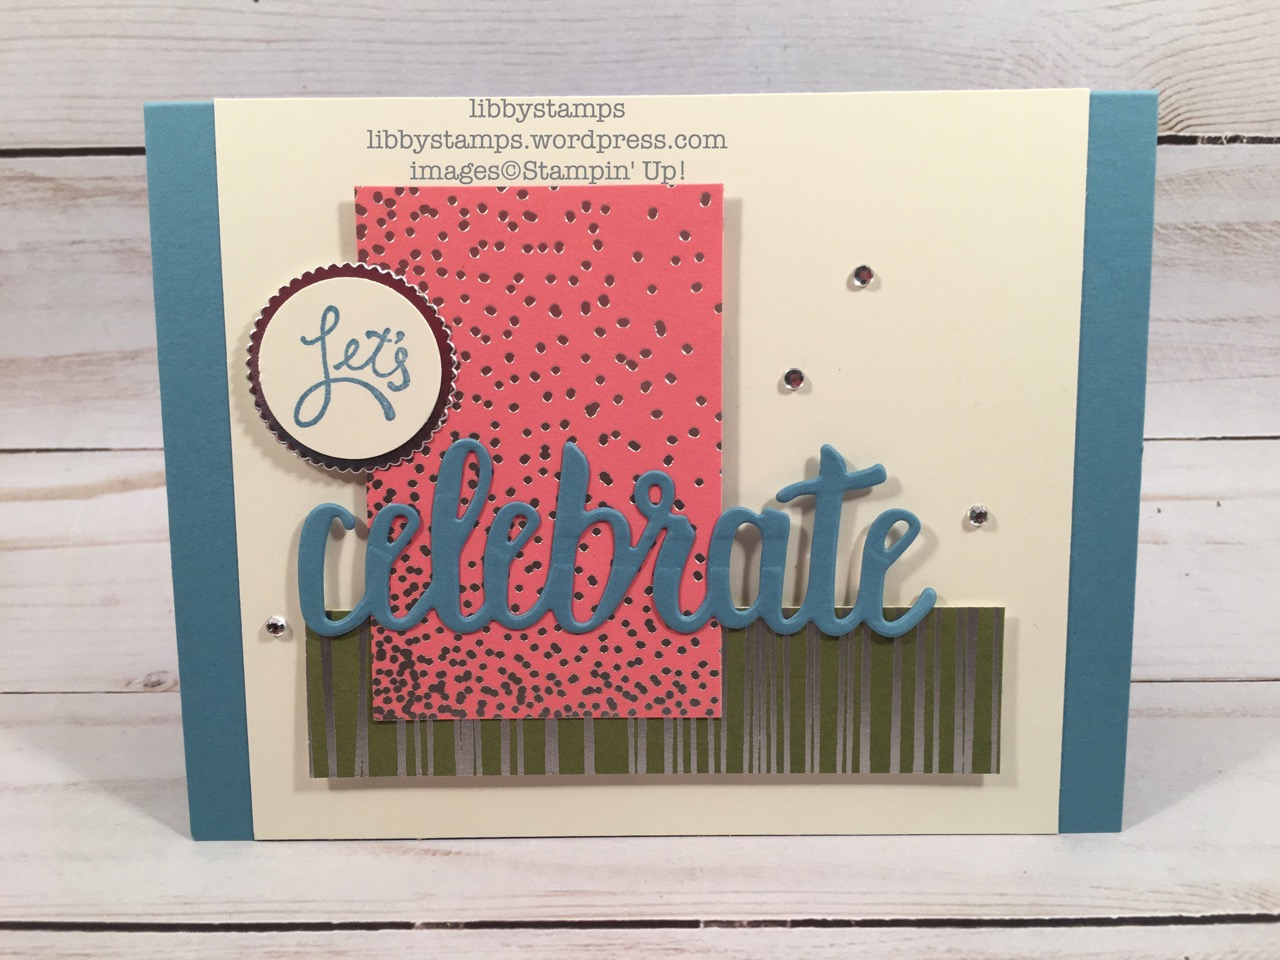 libbystamps, stampin up, Amazing You, Celebrate You, Layering Circles Framelits, Sweet Soiree DSP, Basic Rhinestone Jewels, Occasions 2018, Sale-a-Bration, CCMC